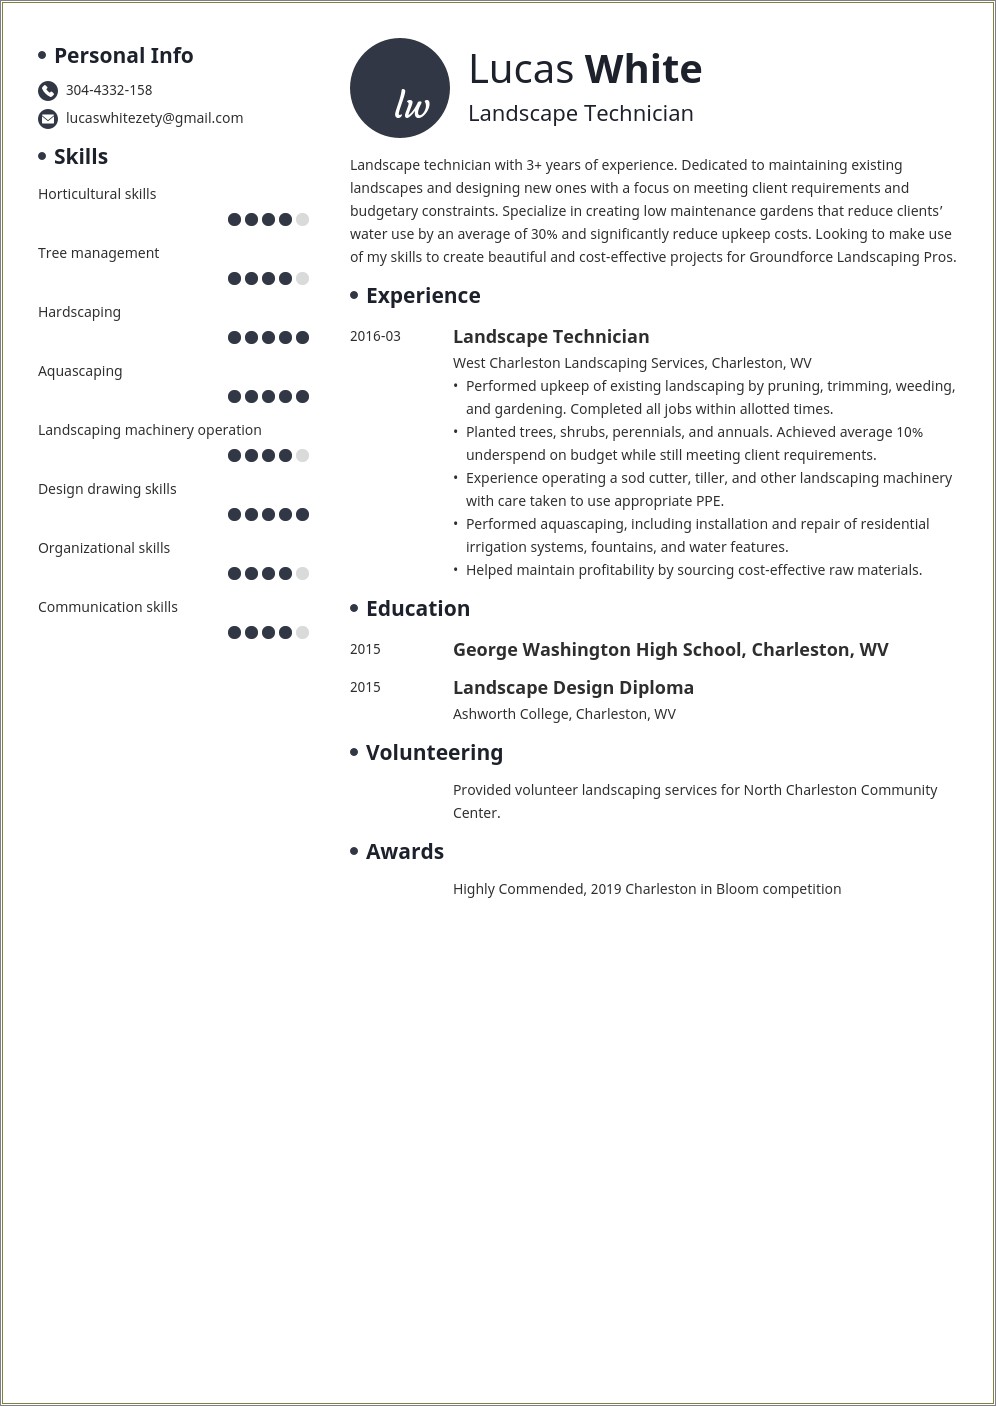 Examples Of Landscape Job Communication Section Of Resume